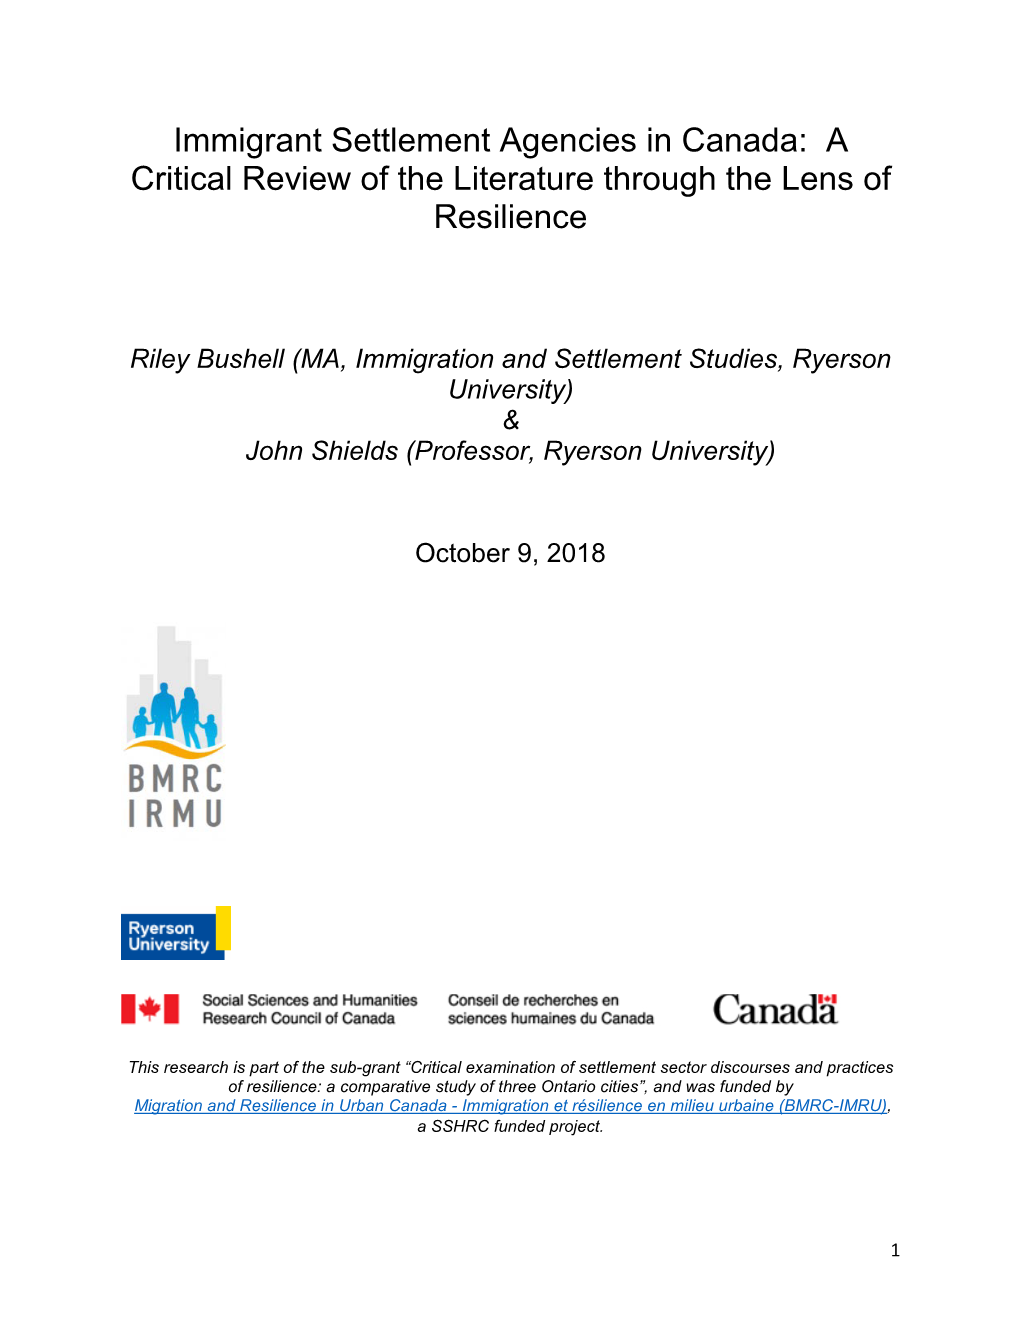 Immigrant Settlement Agencies in Canada: a Critical Review of the Literature Through the Lens of Resilience